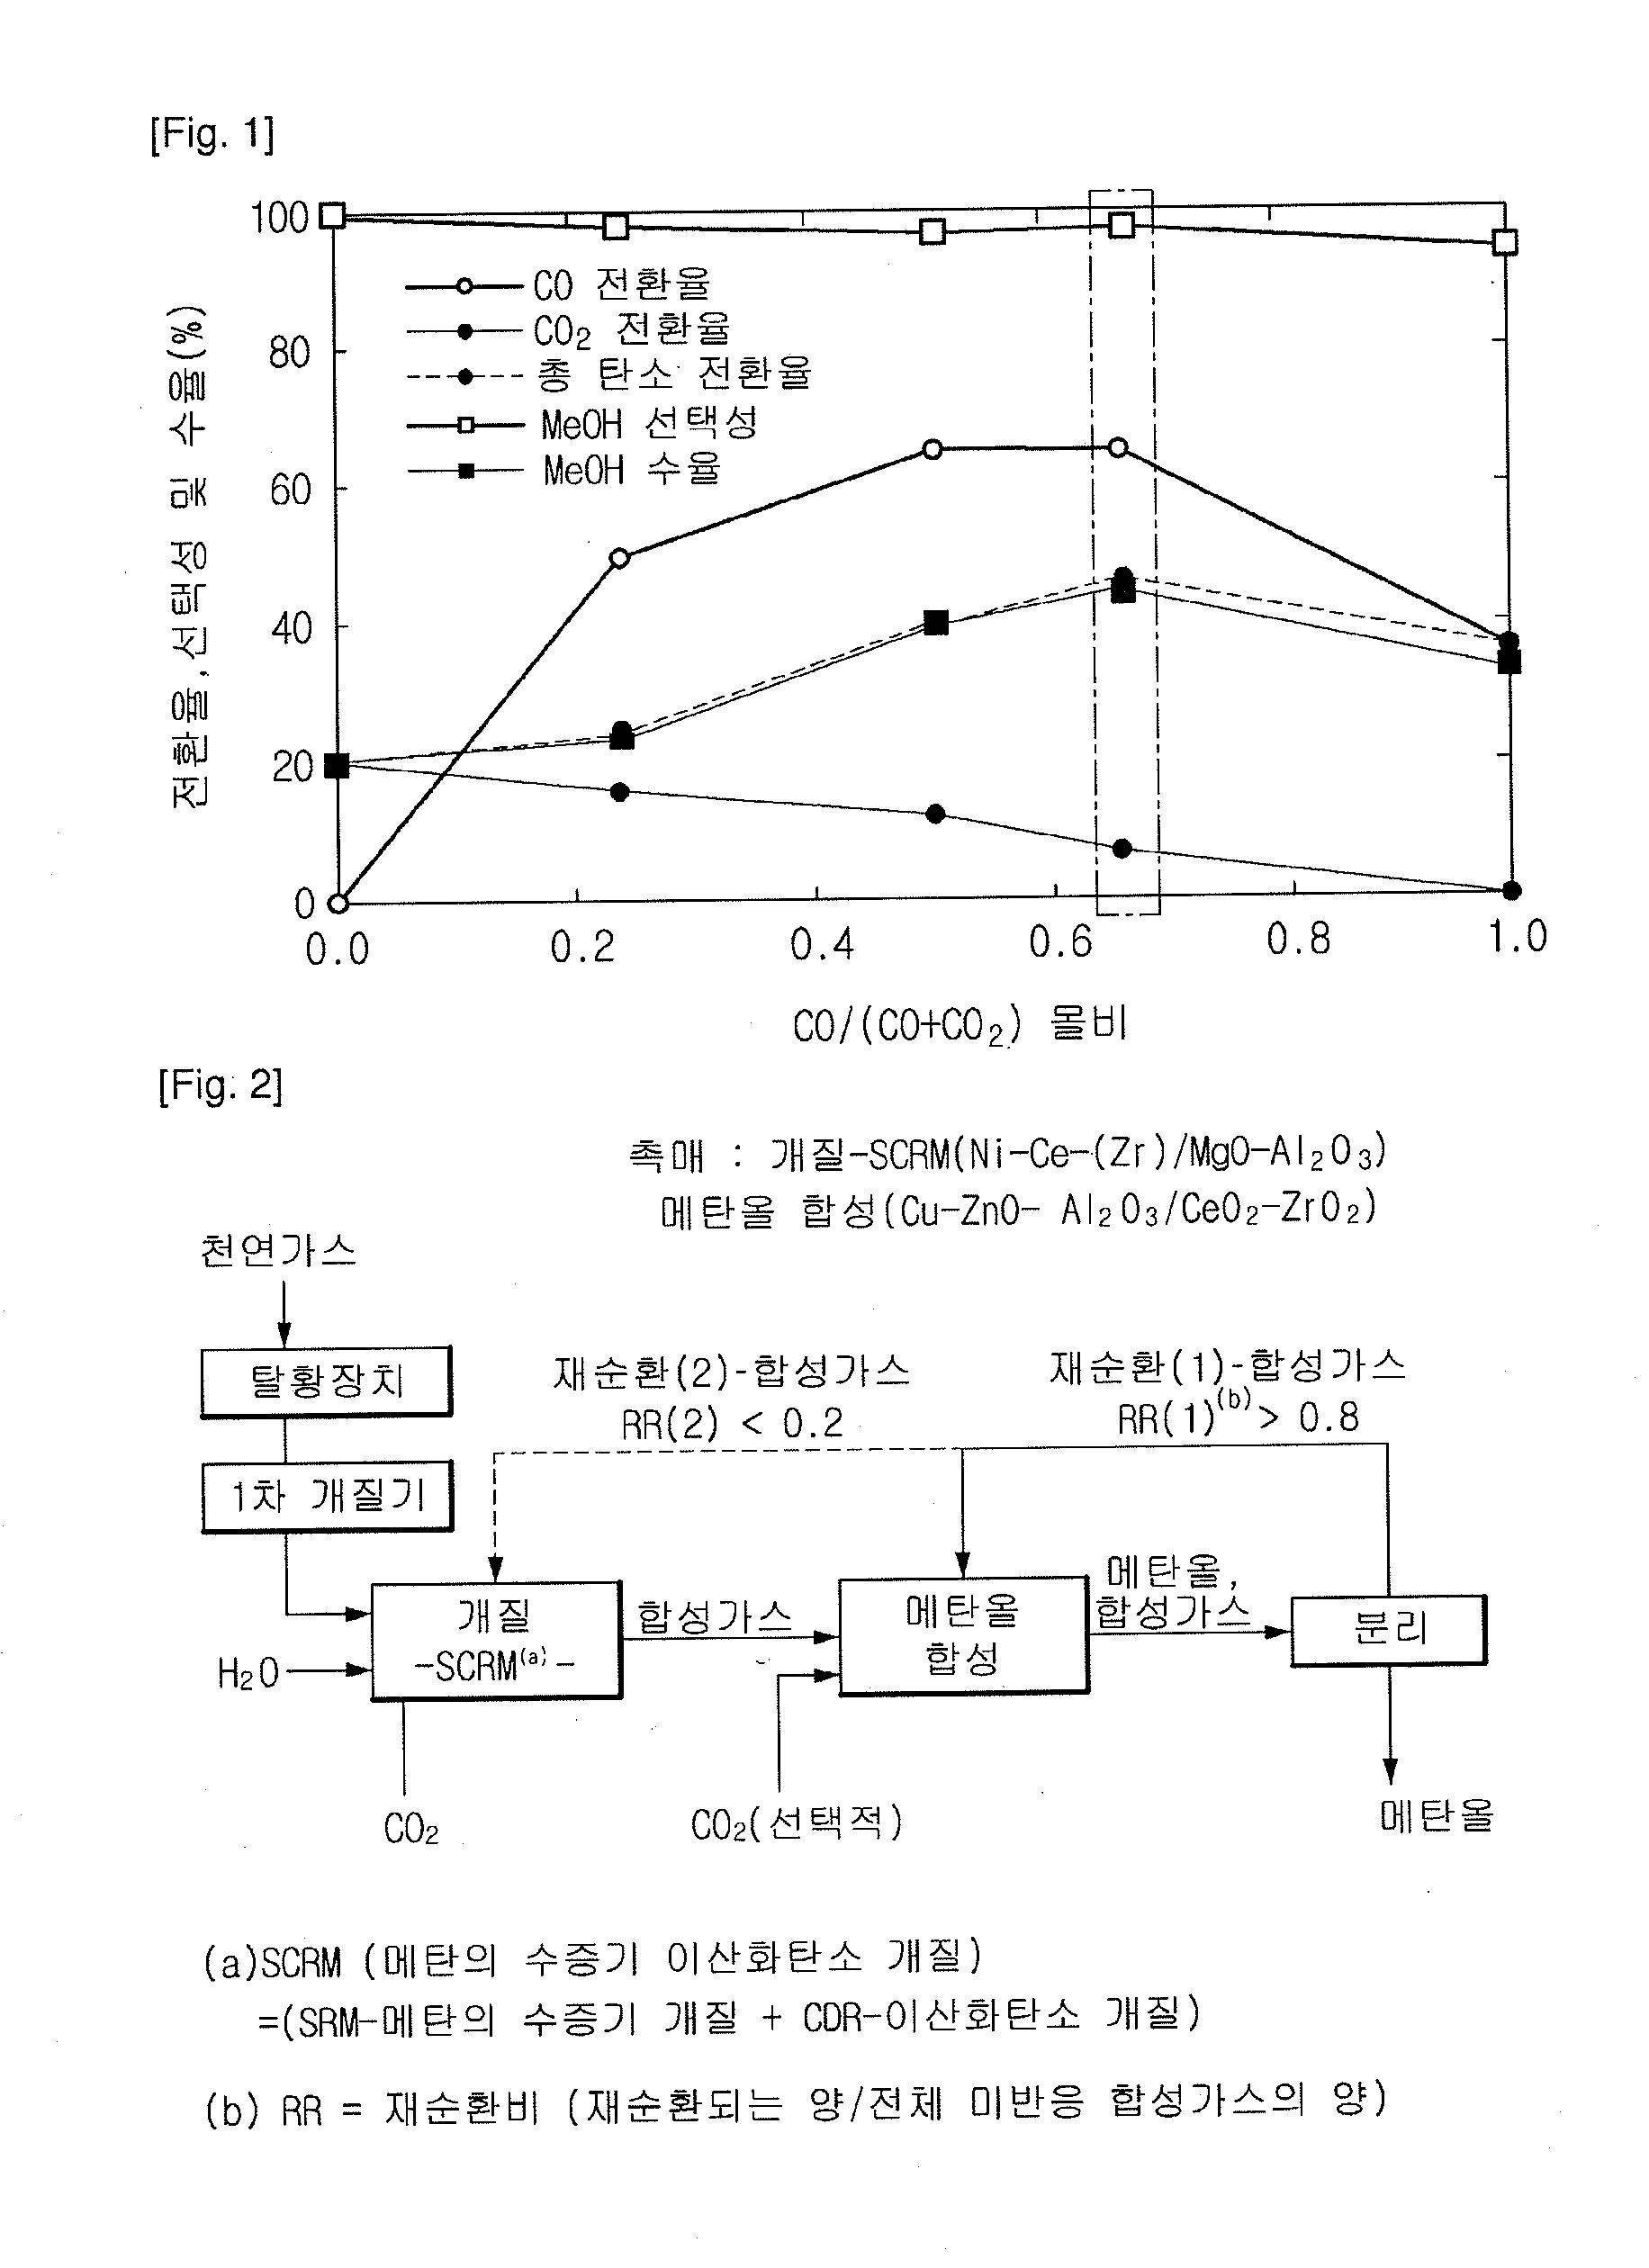 Method for methanol synthesis using synthesis gas generated by combined reforming of natural gas with carbon dioxide